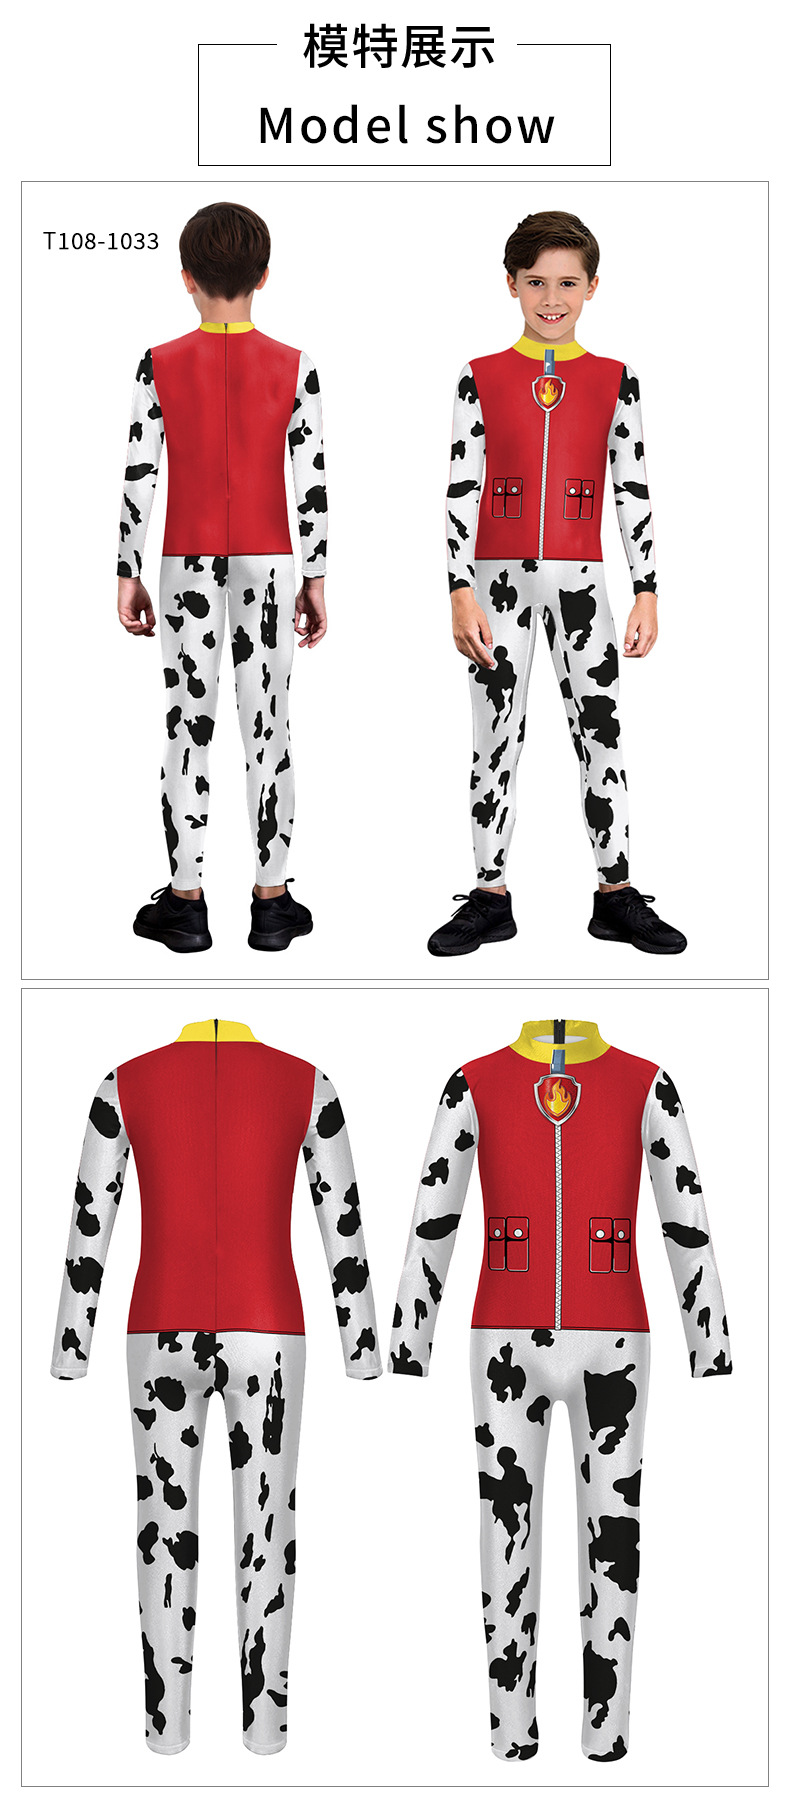 Paw Patrol Movie Character Marshall Cosplay Jumpsuit for Halloween - Model show